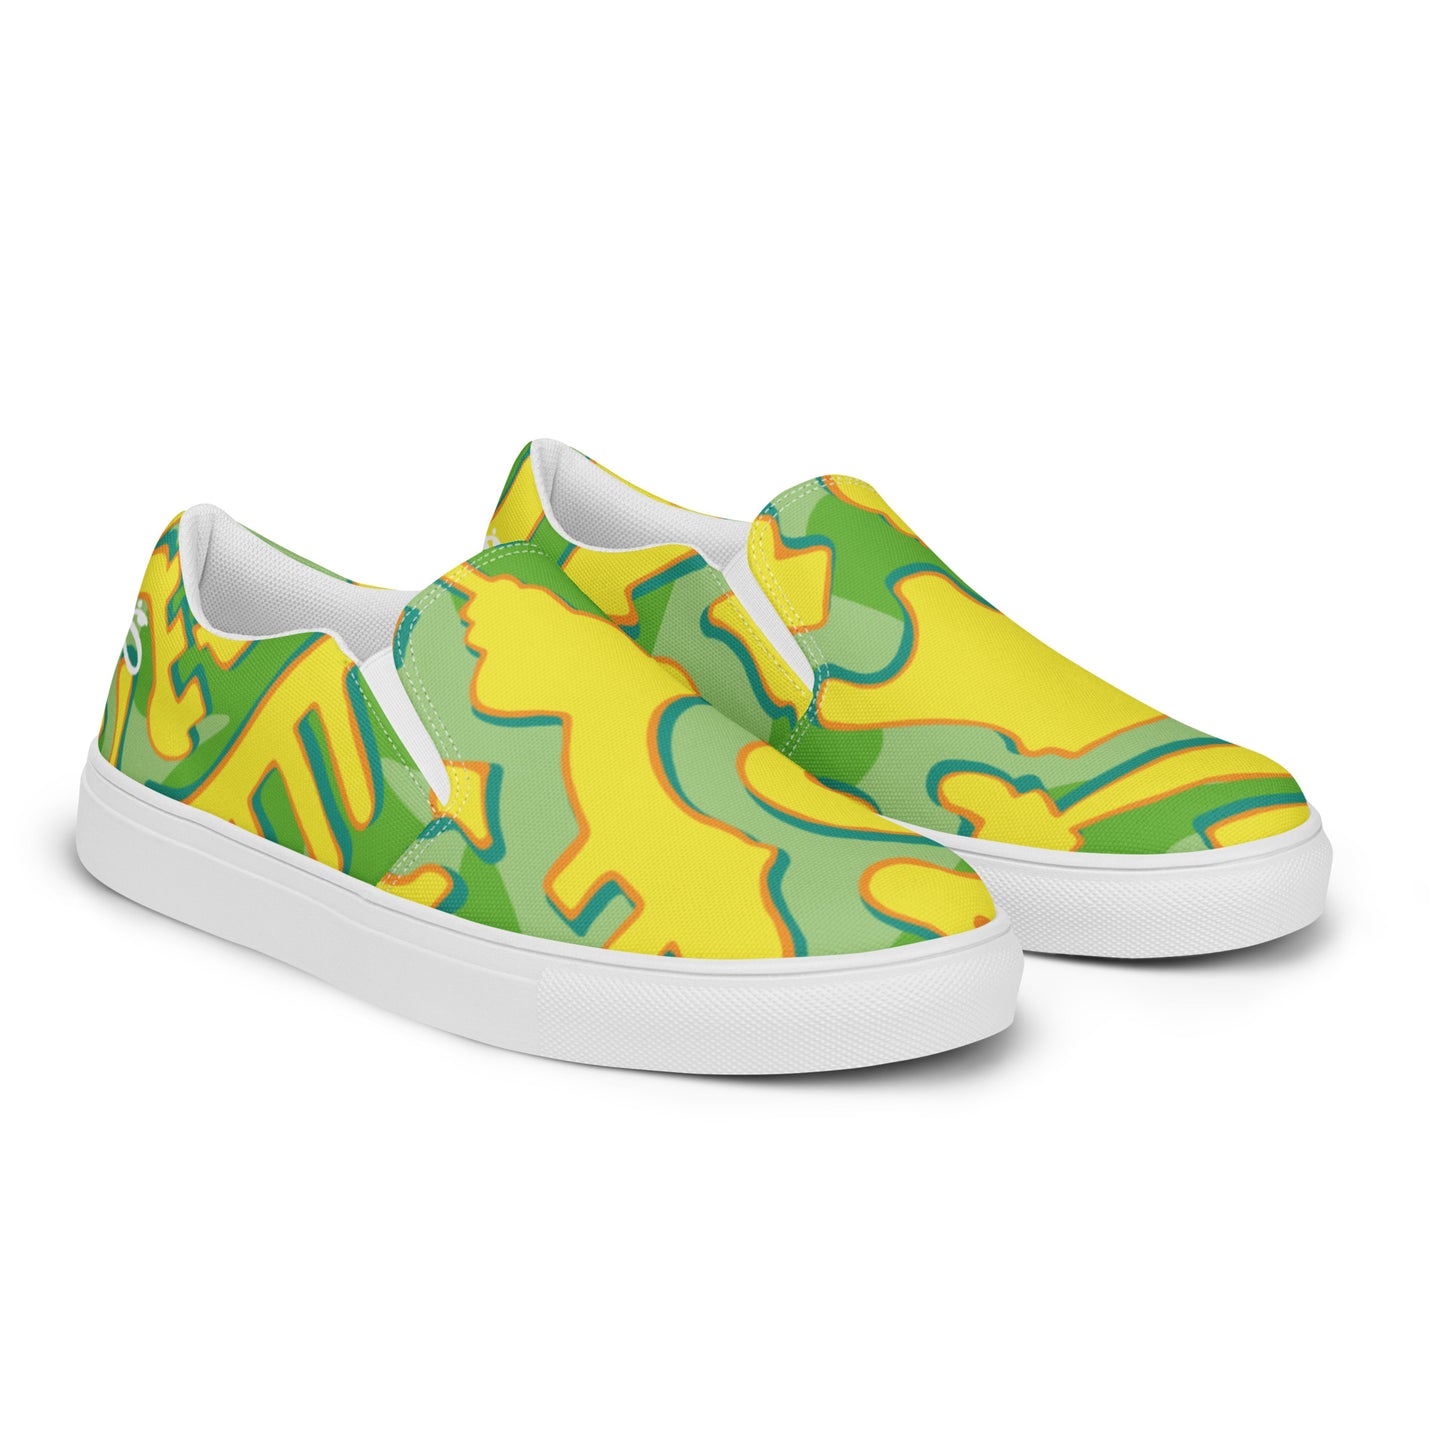 BLIMEY LIMEY by DOLVING - Men’s slip-on canvas shoes